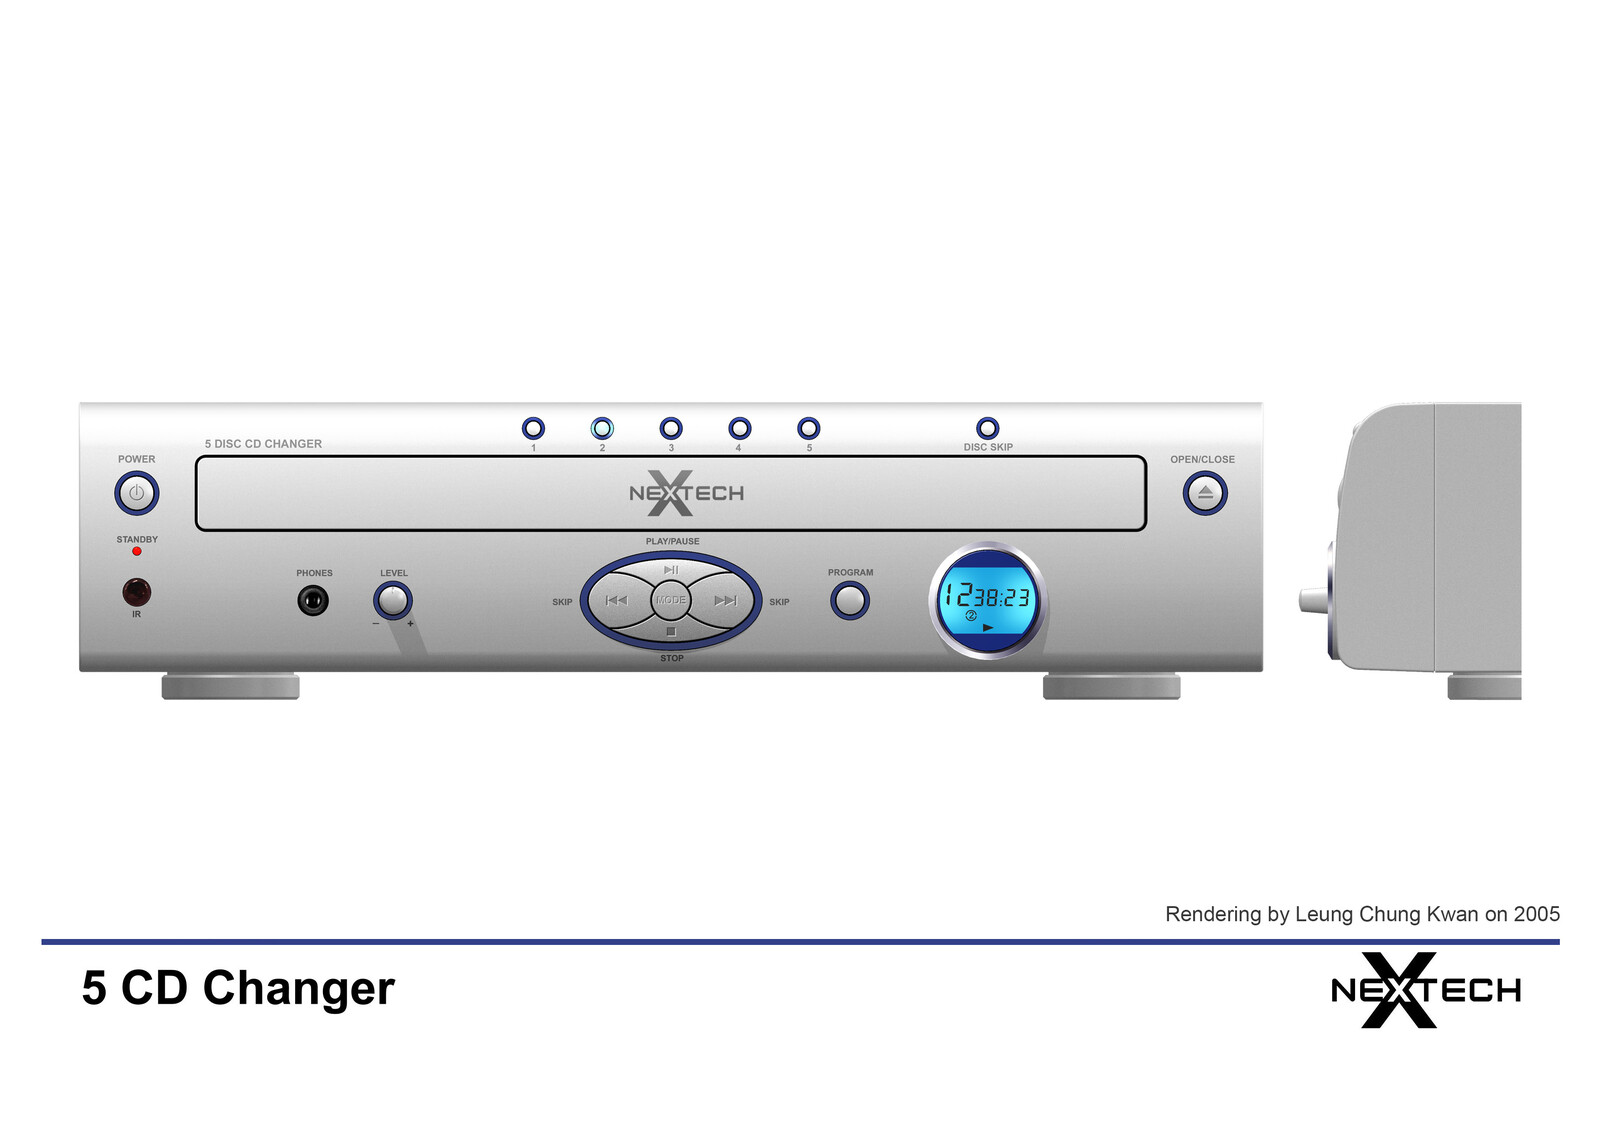 💎 5 CD Changer | Rendering by Leung Chung Kwan on 2005 💎
Brand Name︰NEXTECH | Client︰Star Light Electronics Co., Ltd.